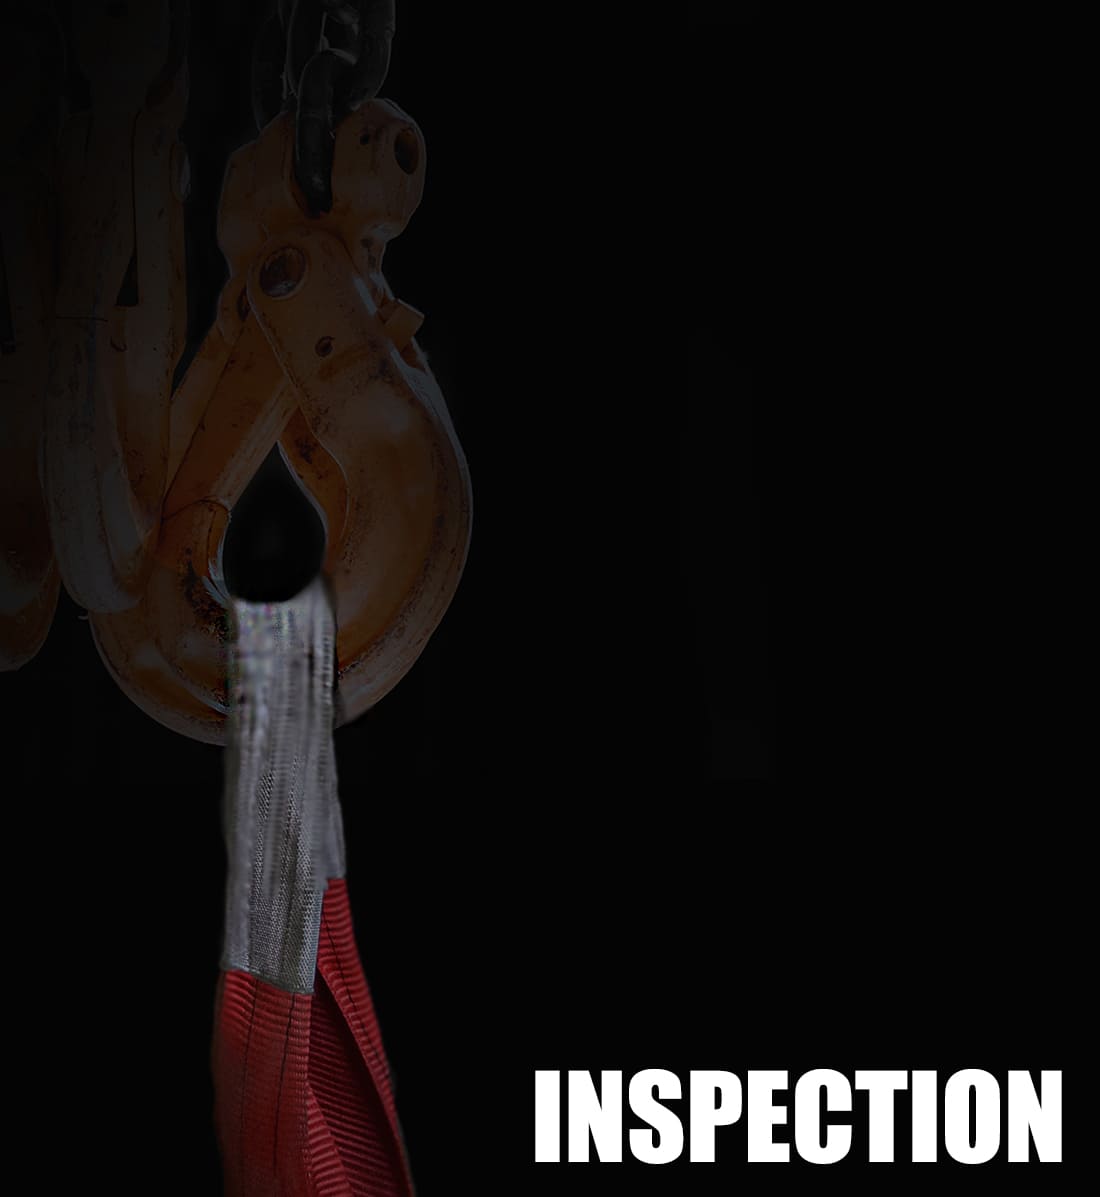 3 stage inspection guidelines